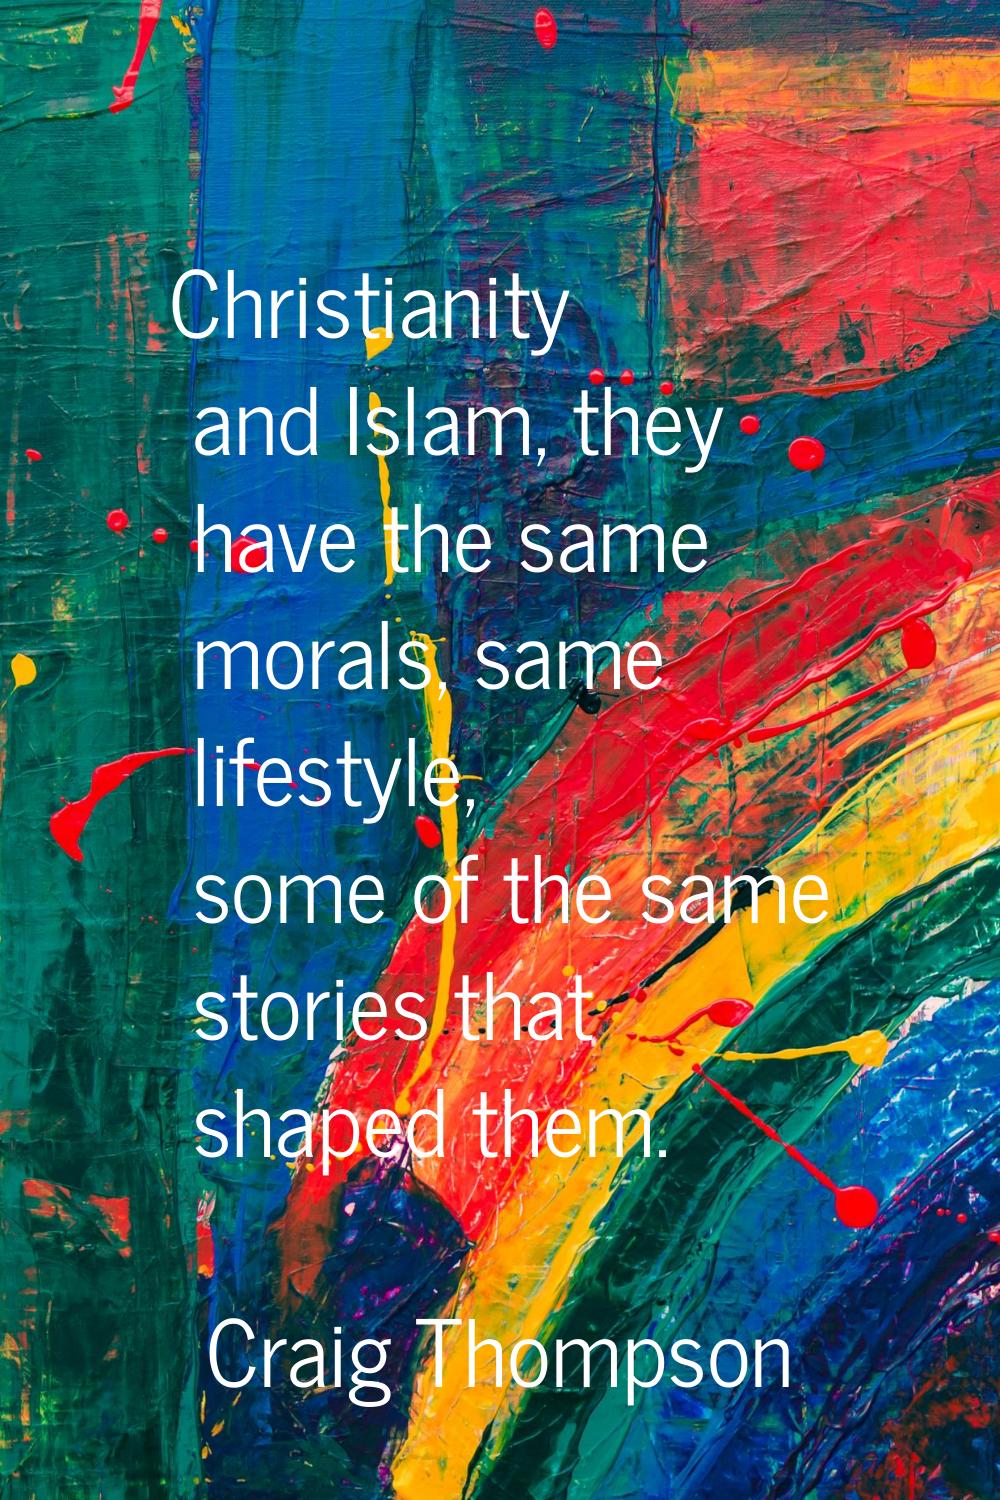 Christianity and Islam, they have the same morals, same lifestyle, some of the same stories that sh